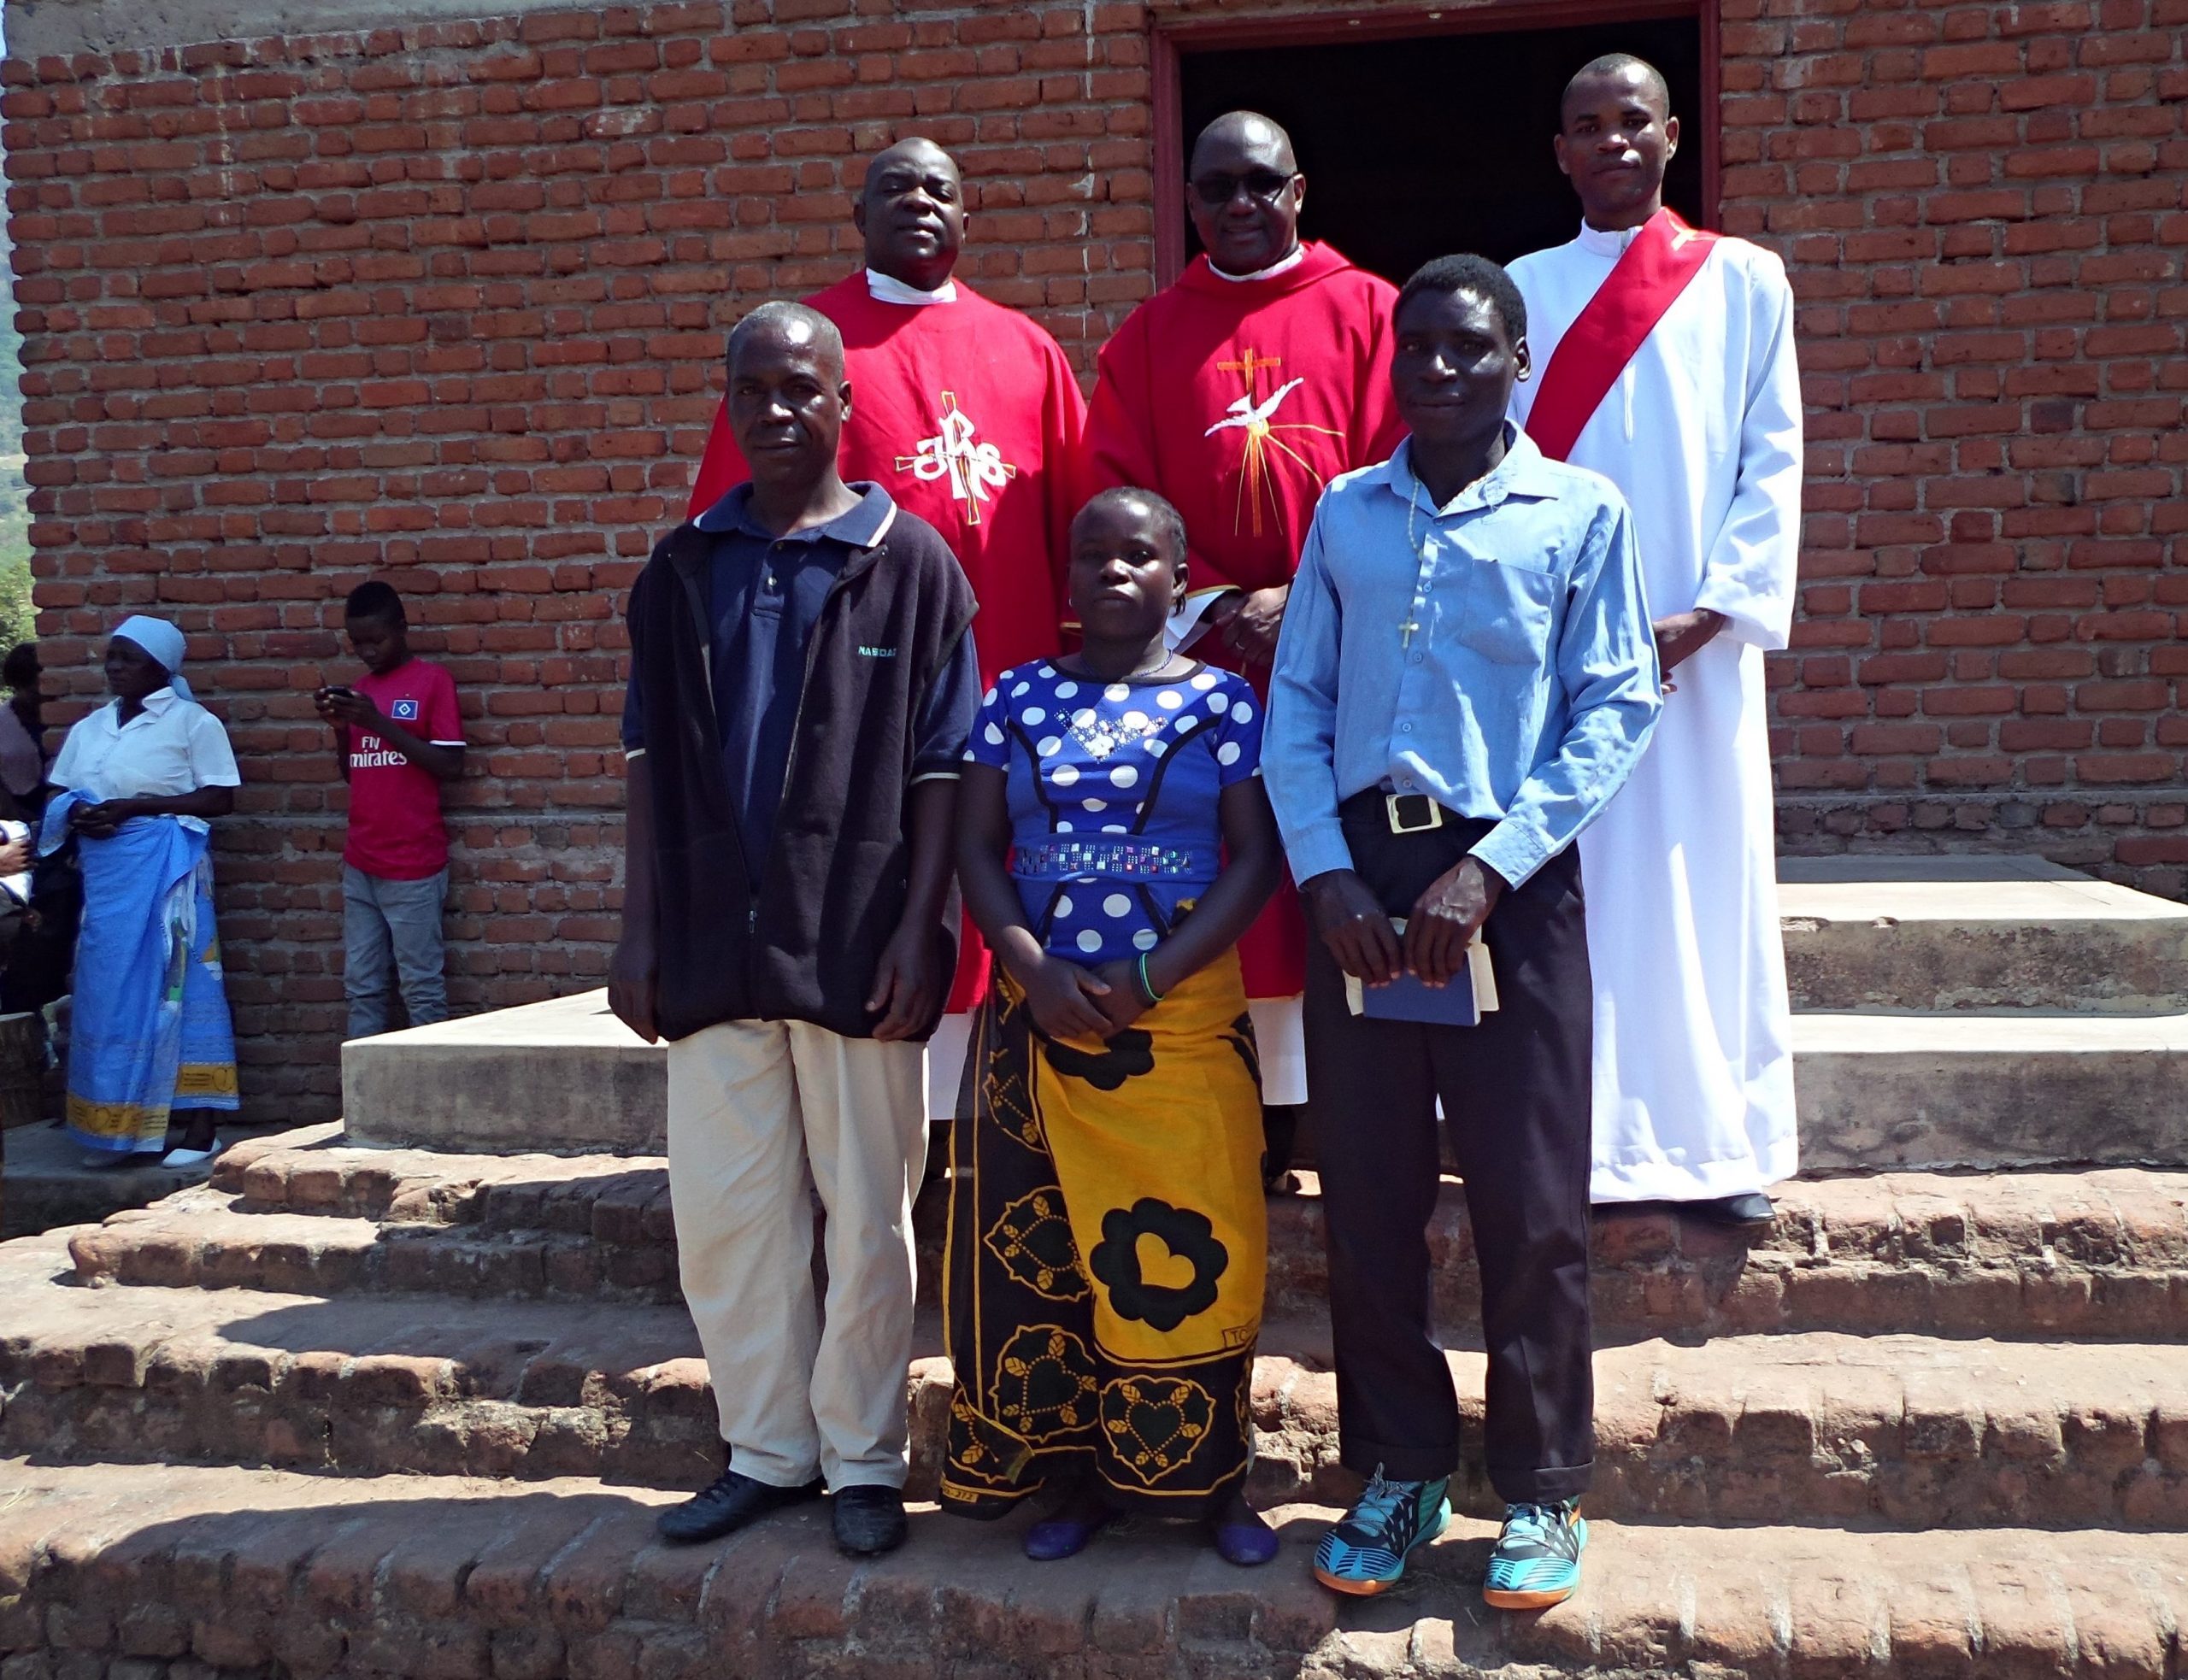 Innocent Harawa (with hymn book in his hands), Nancy Kapira (lady) and Kumbukani Nyirenda (next to Nancy) have a photo with the Vicar General (in specs behind Nancy).